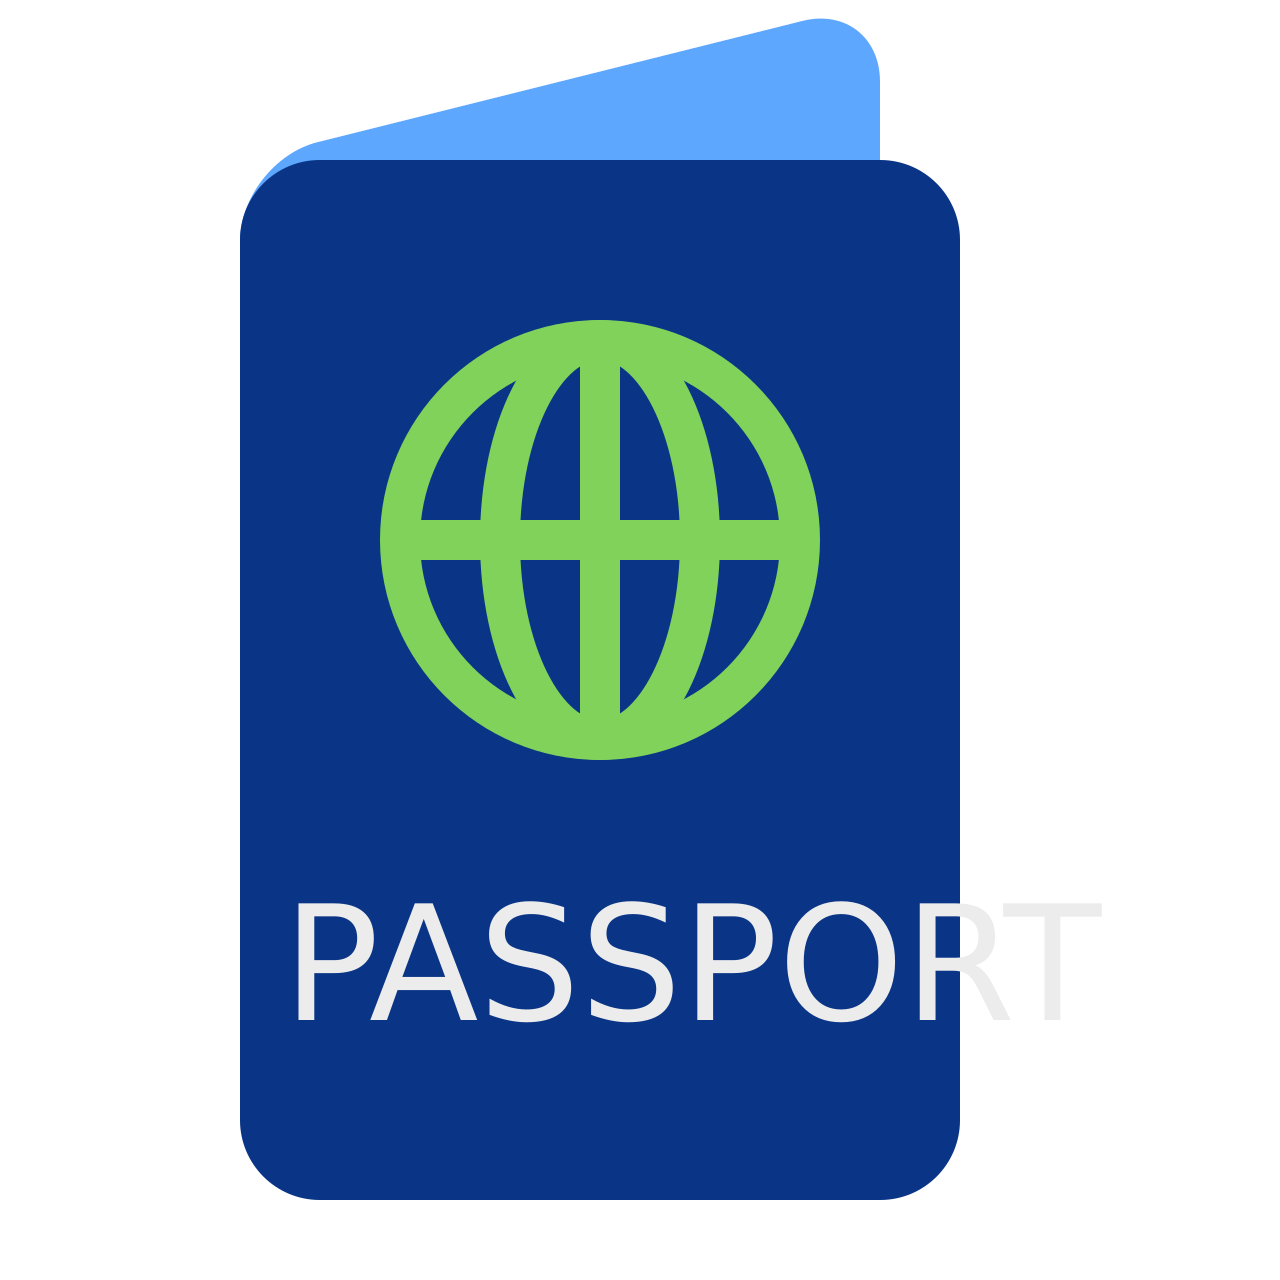 Passport Png And Svg Files Free Download 8876